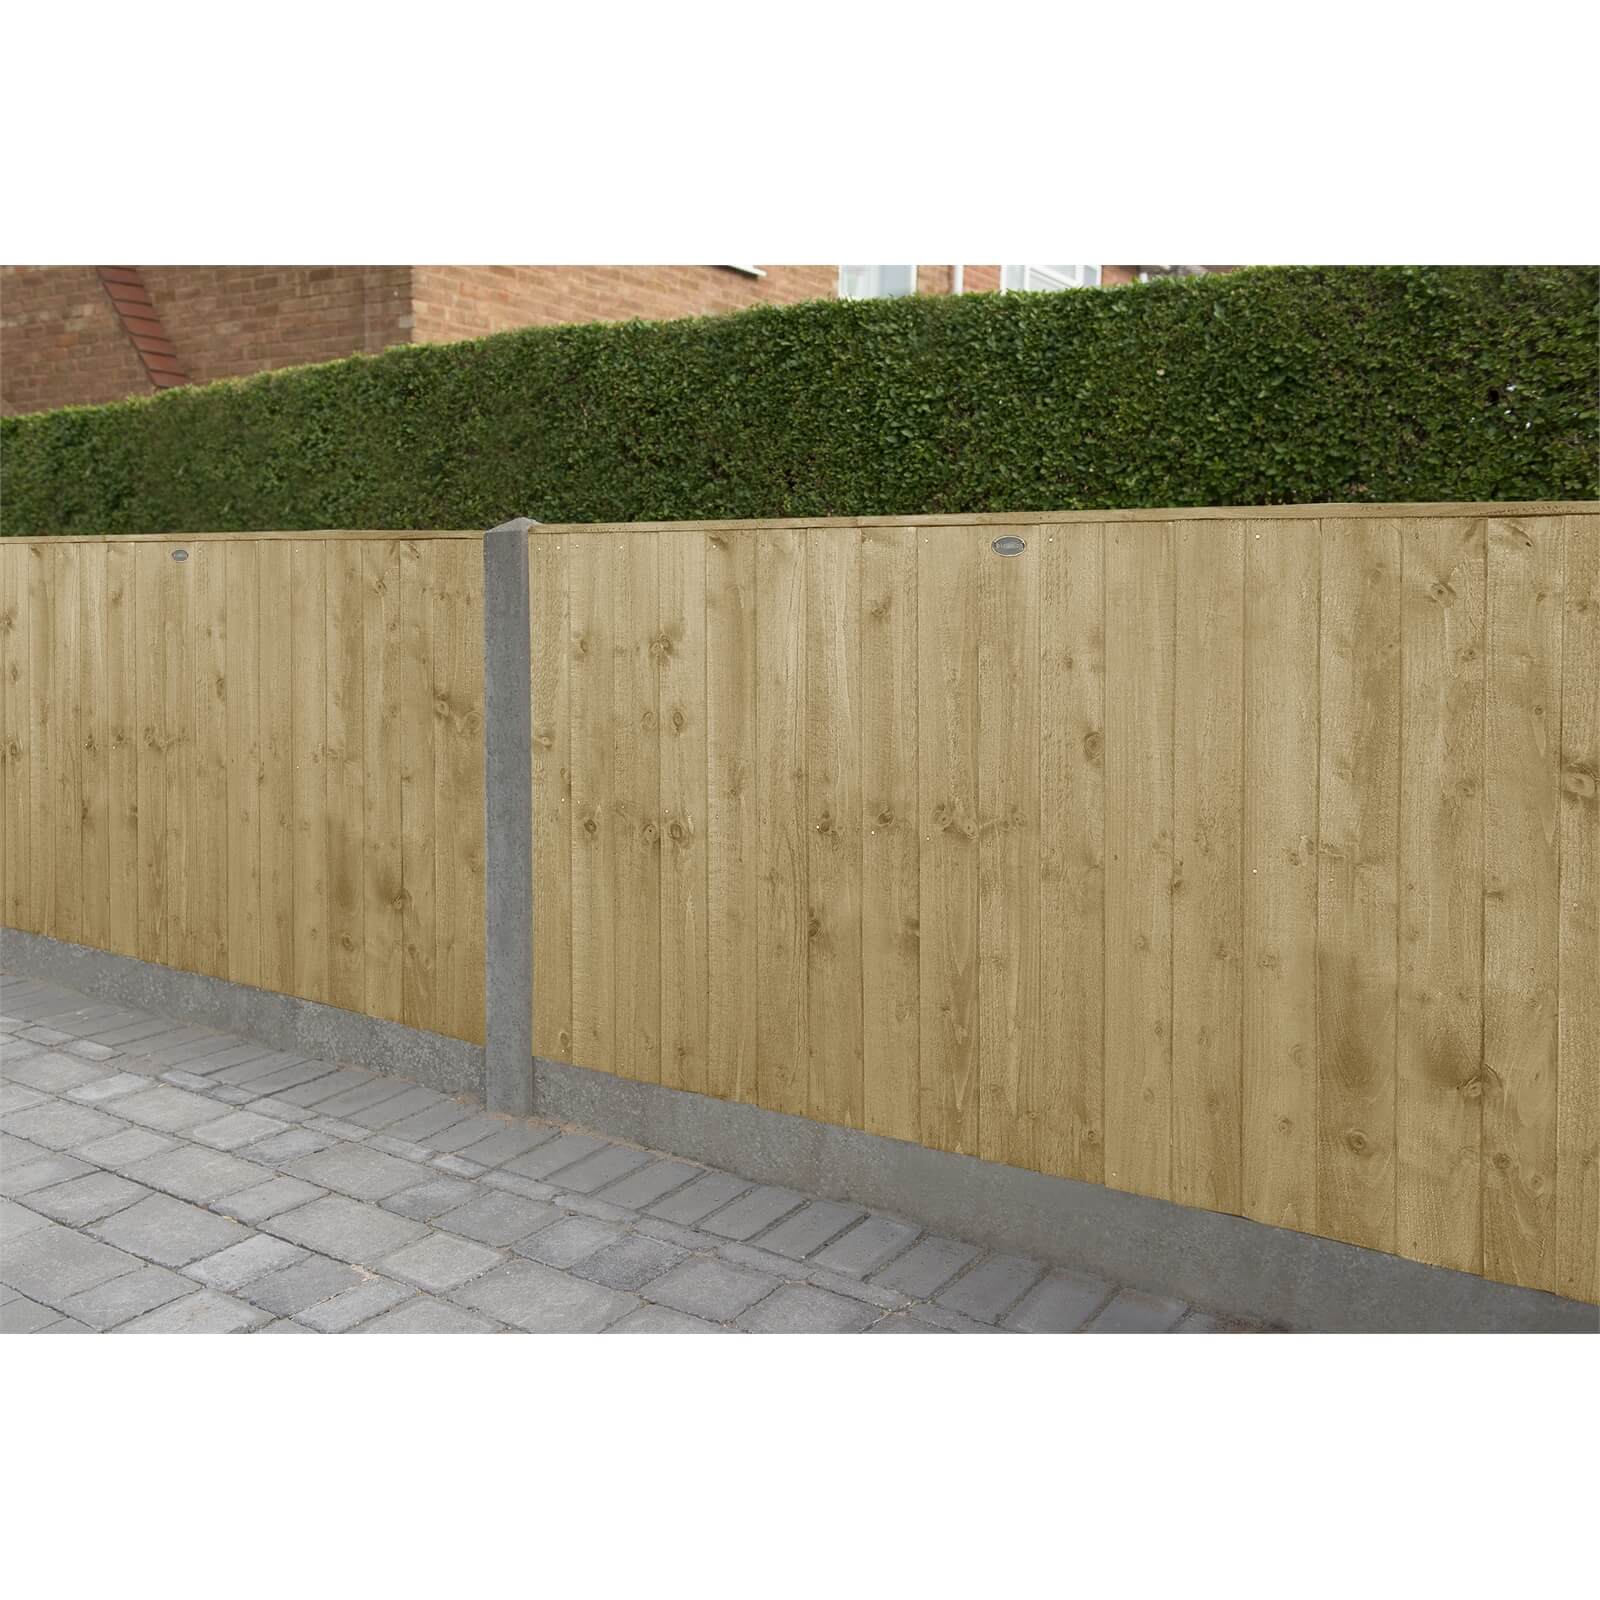 6ft x 3ft (1.83m x 0.93m) Pressure Treated Featheredge Fence Panel - Pack of 20